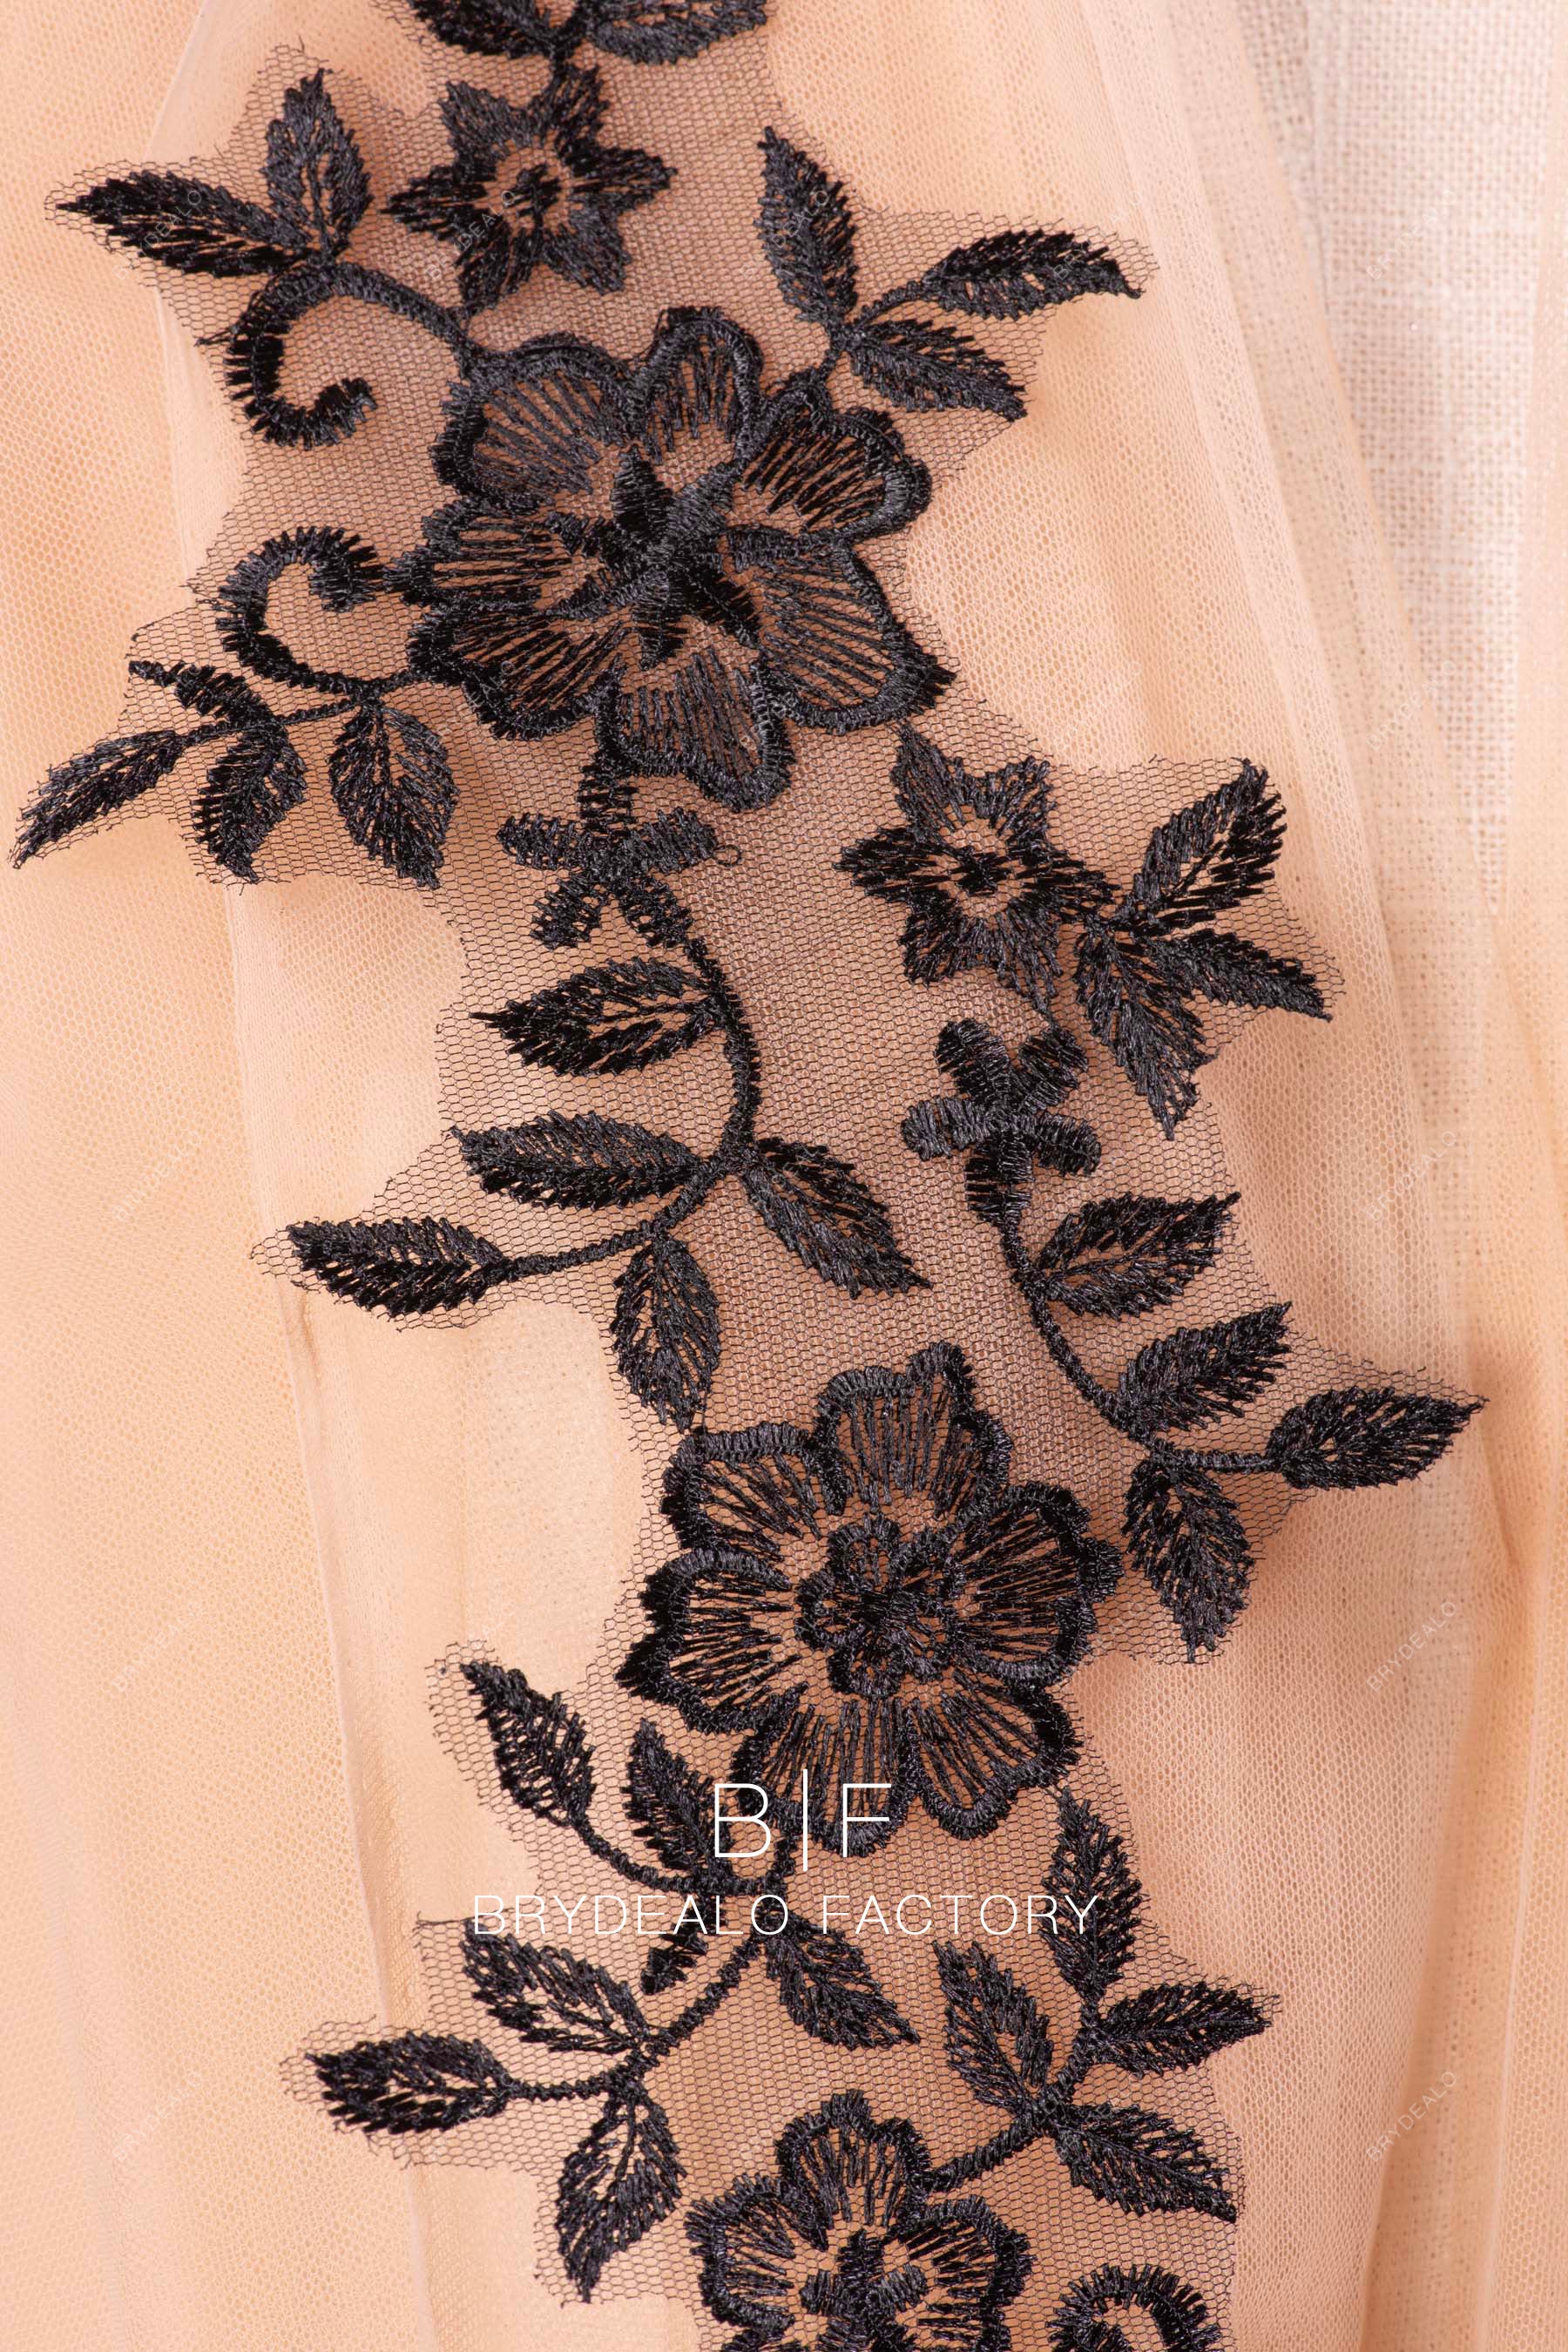 Black Embroidered Lace Fabric, Black Lace Fabric 